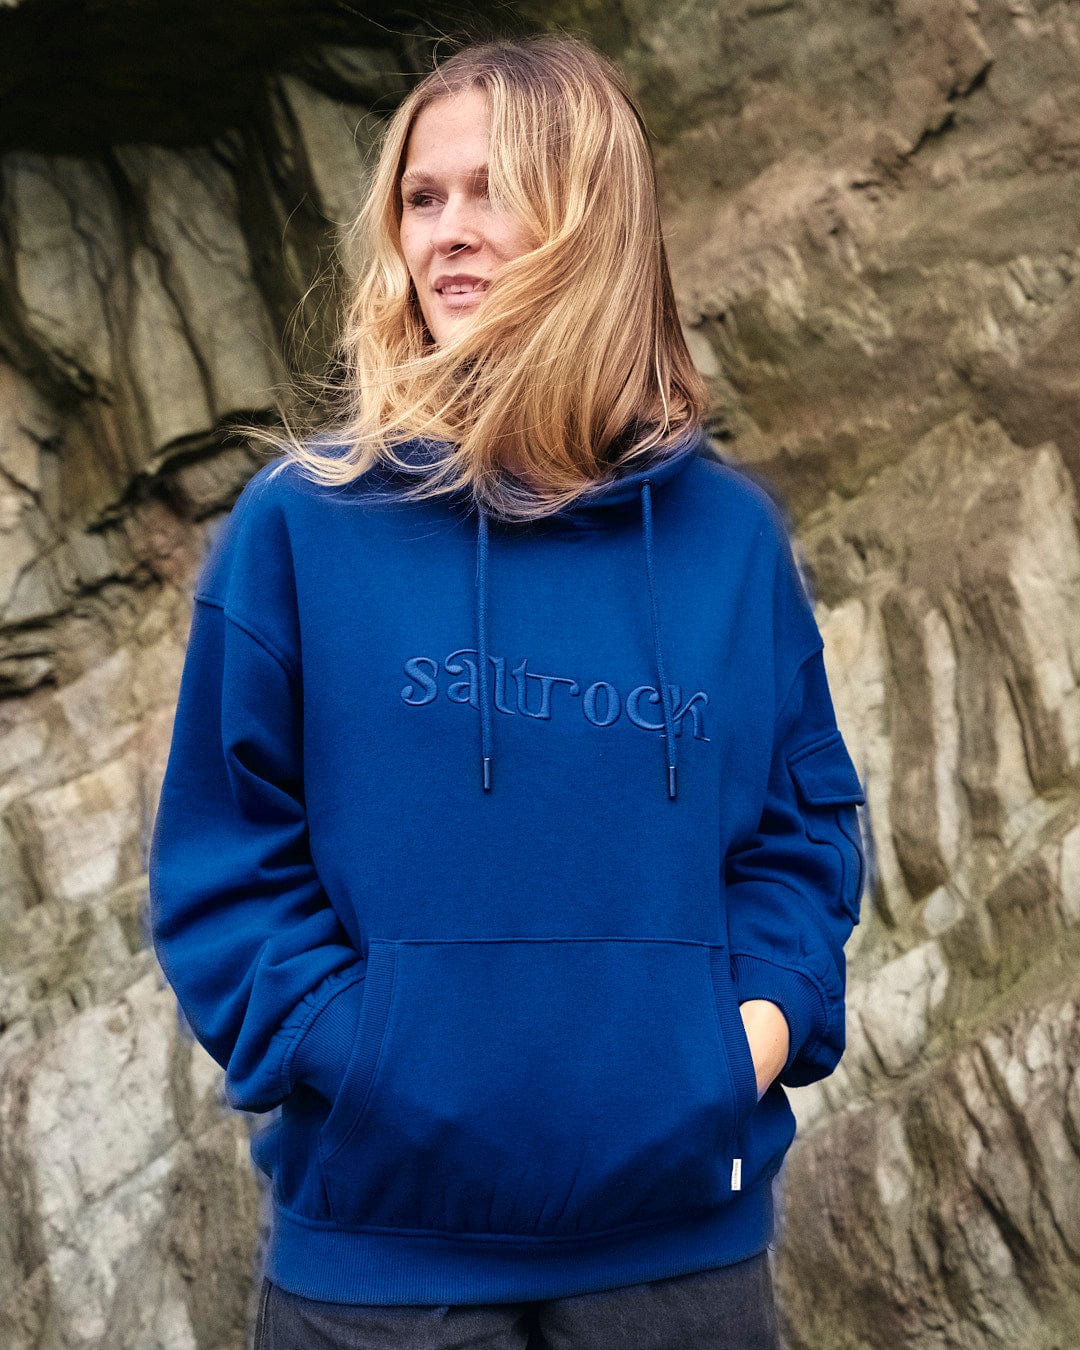 A woman wearing a blue Celeste - Womens Pop Hoodie - Blue with embroidered Saltrock branding, in front of rocks.